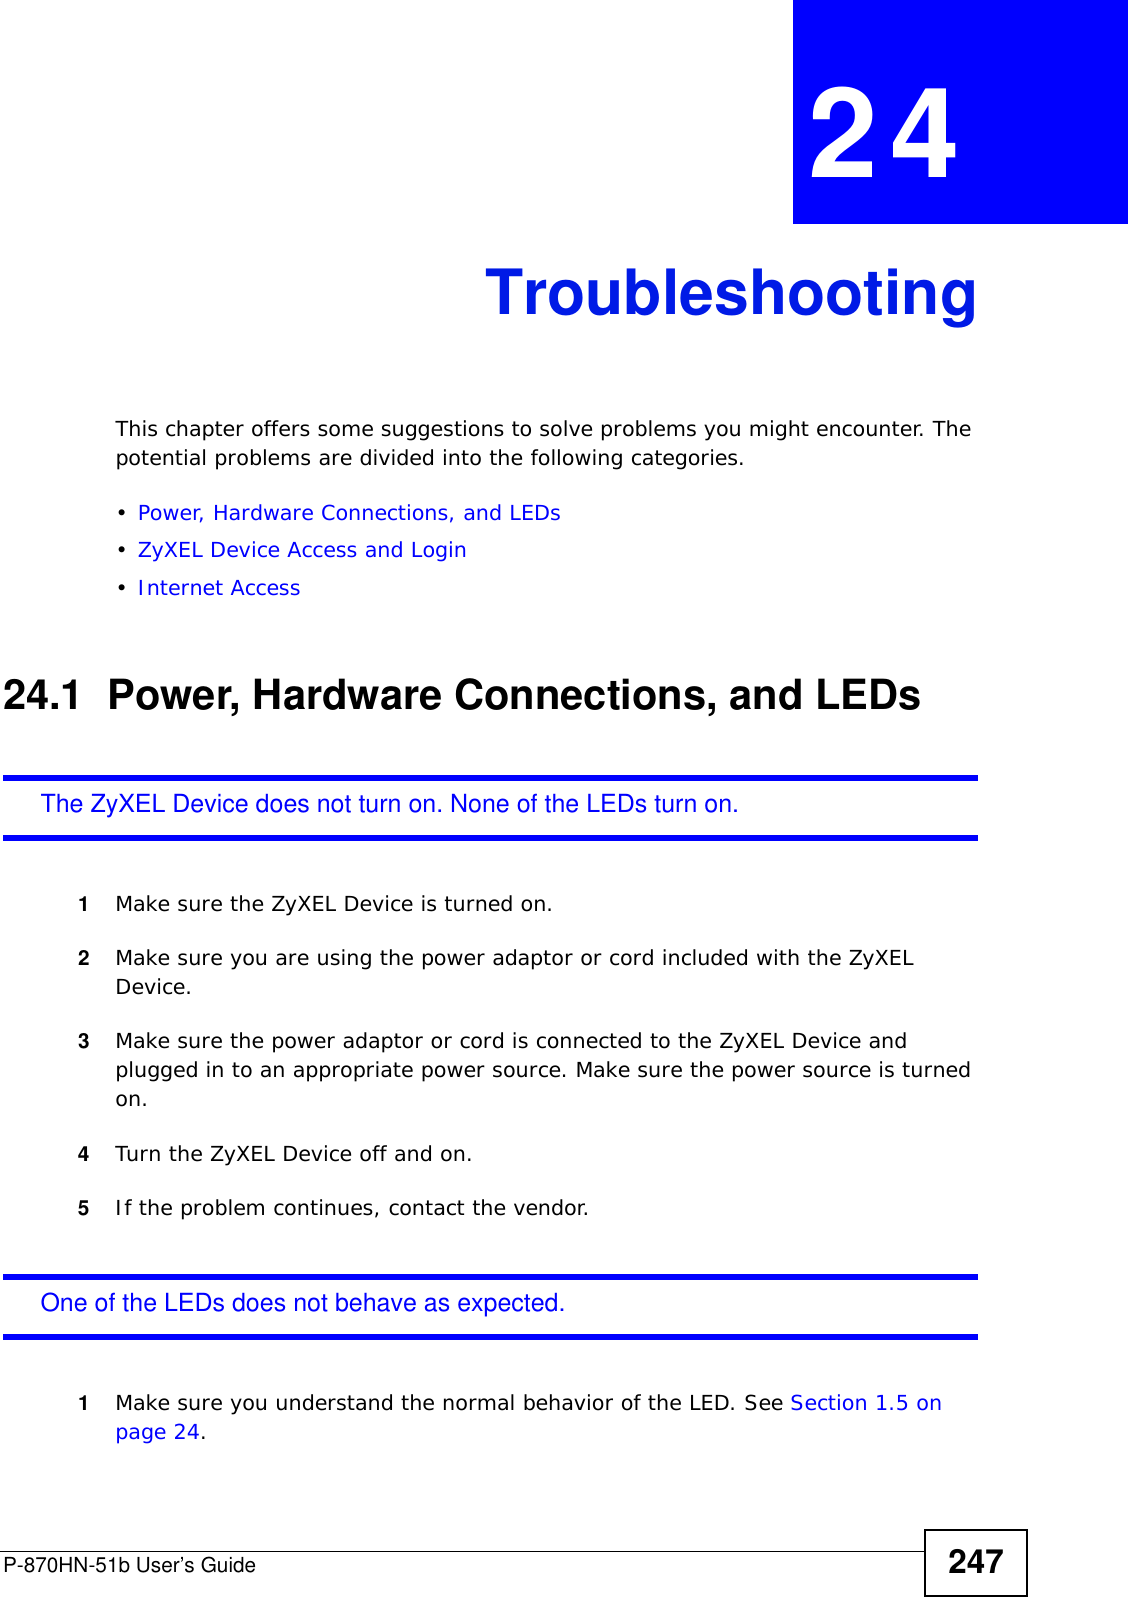 P-870HN-51b User’s Guide 247CHAPTER  24 TroubleshootingThis chapter offers some suggestions to solve problems you might encounter. The potential problems are divided into the following categories. •Power, Hardware Connections, and LEDs•ZyXEL Device Access and Login•Internet Access24.1  Power, Hardware Connections, and LEDsThe ZyXEL Device does not turn on. None of the LEDs turn on.1Make sure the ZyXEL Device is turned on. 2Make sure you are using the power adaptor or cord included with the ZyXEL Device.3Make sure the power adaptor or cord is connected to the ZyXEL Device and plugged in to an appropriate power source. Make sure the power source is turned on.4Turn the ZyXEL Device off and on. 5If the problem continues, contact the vendor.One of the LEDs does not behave as expected.1Make sure you understand the normal behavior of the LED. See Section 1.5 on page 24.